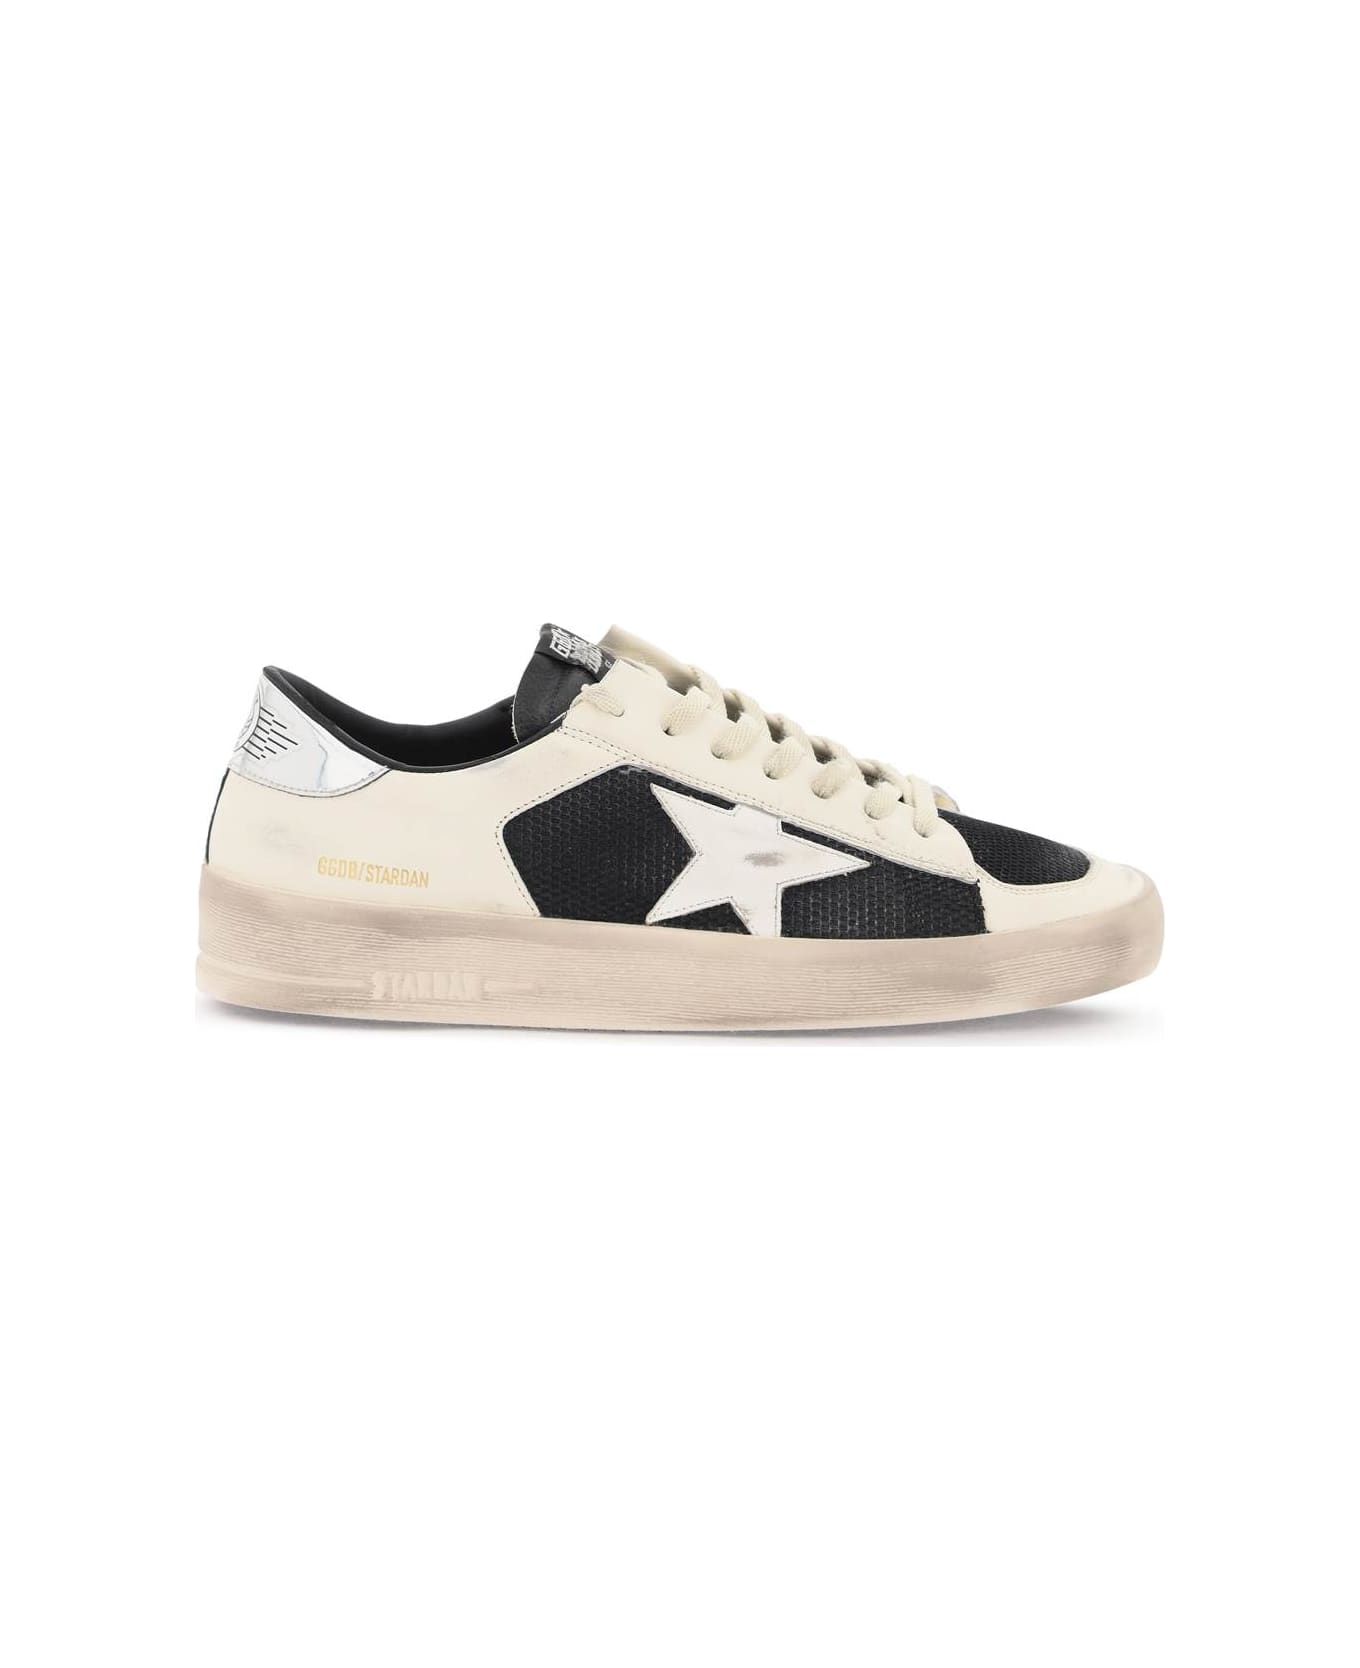 Golden Goose Mesh And Leather Stardan Sneakers - WHITE BLACK SILVER (Black)